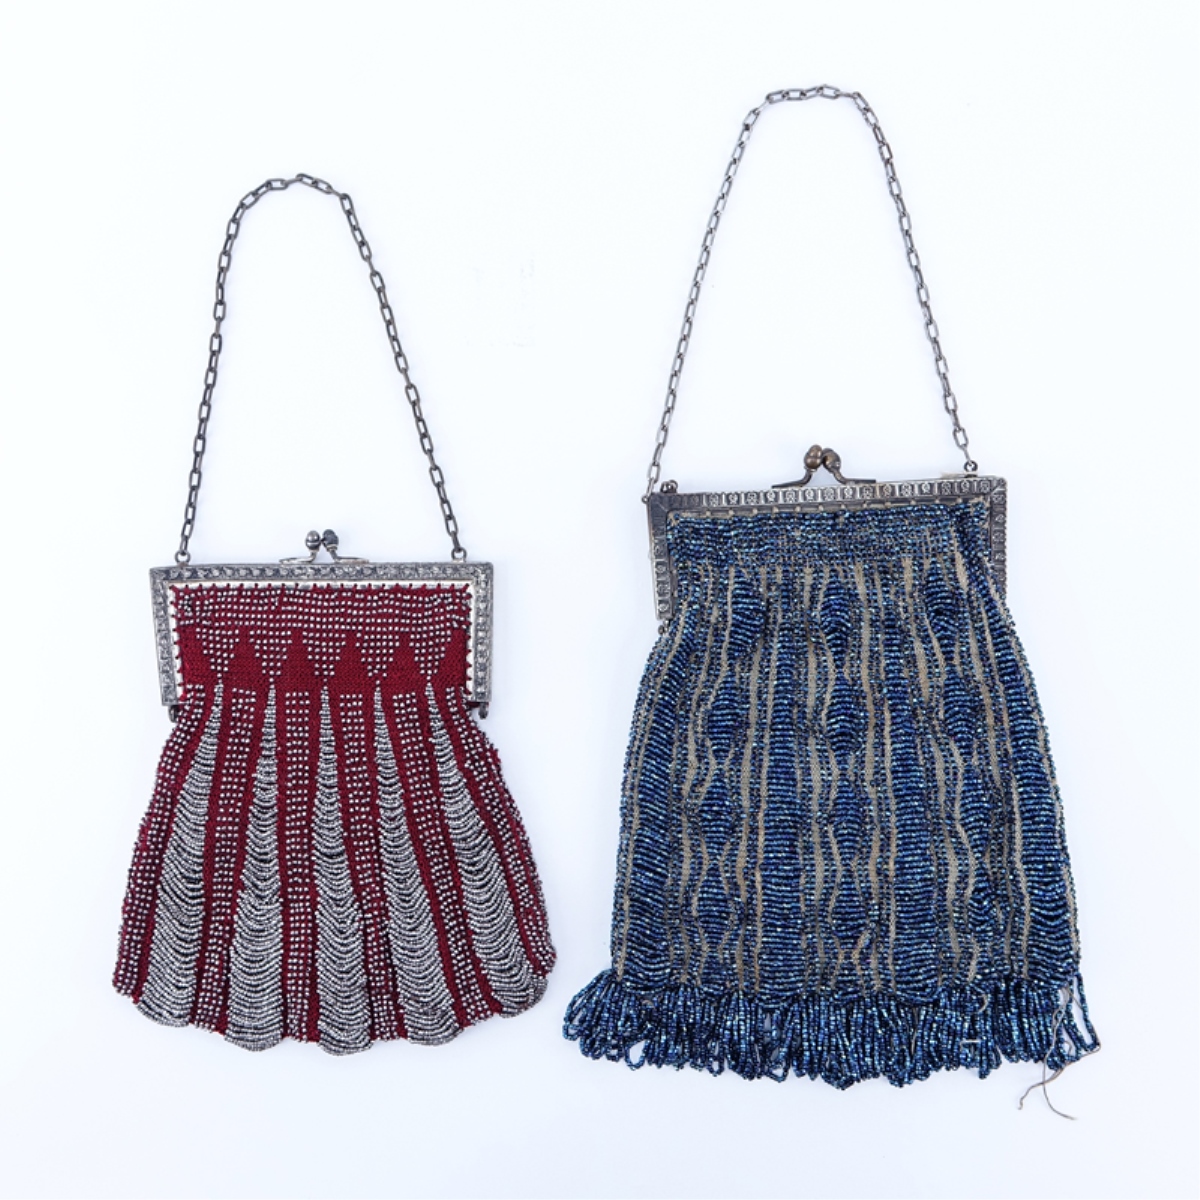 Two (2) Antique Red & Blue Beaded Evening Bags